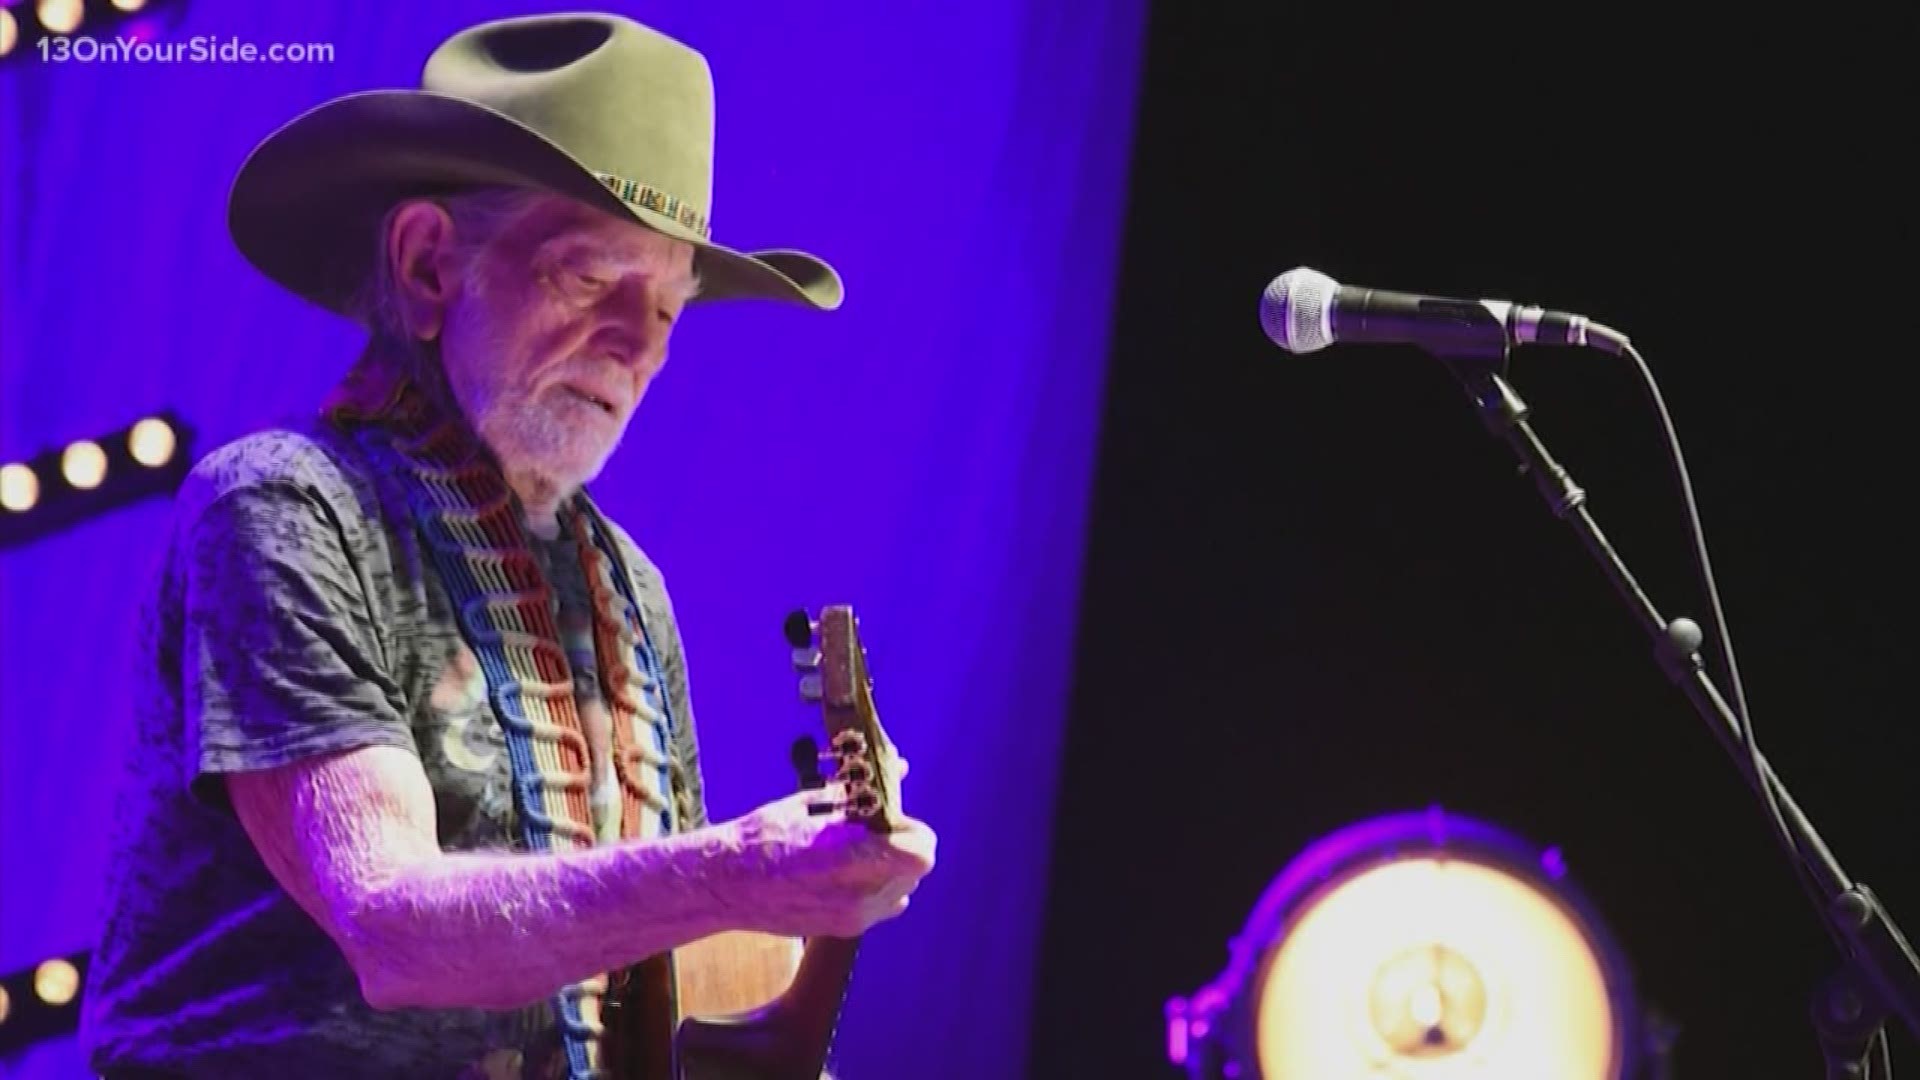 Willie Nelson has canceled his tour because of a "breathing problem." The 86-year-old singer apologized on Twitter late Wednesday, writing "I need to have my doctor check out." Nelson had just finished performing with Alison Krauss in Toledo, Ohio, and he was next scheduled to appear Friday in Grand Rapids.